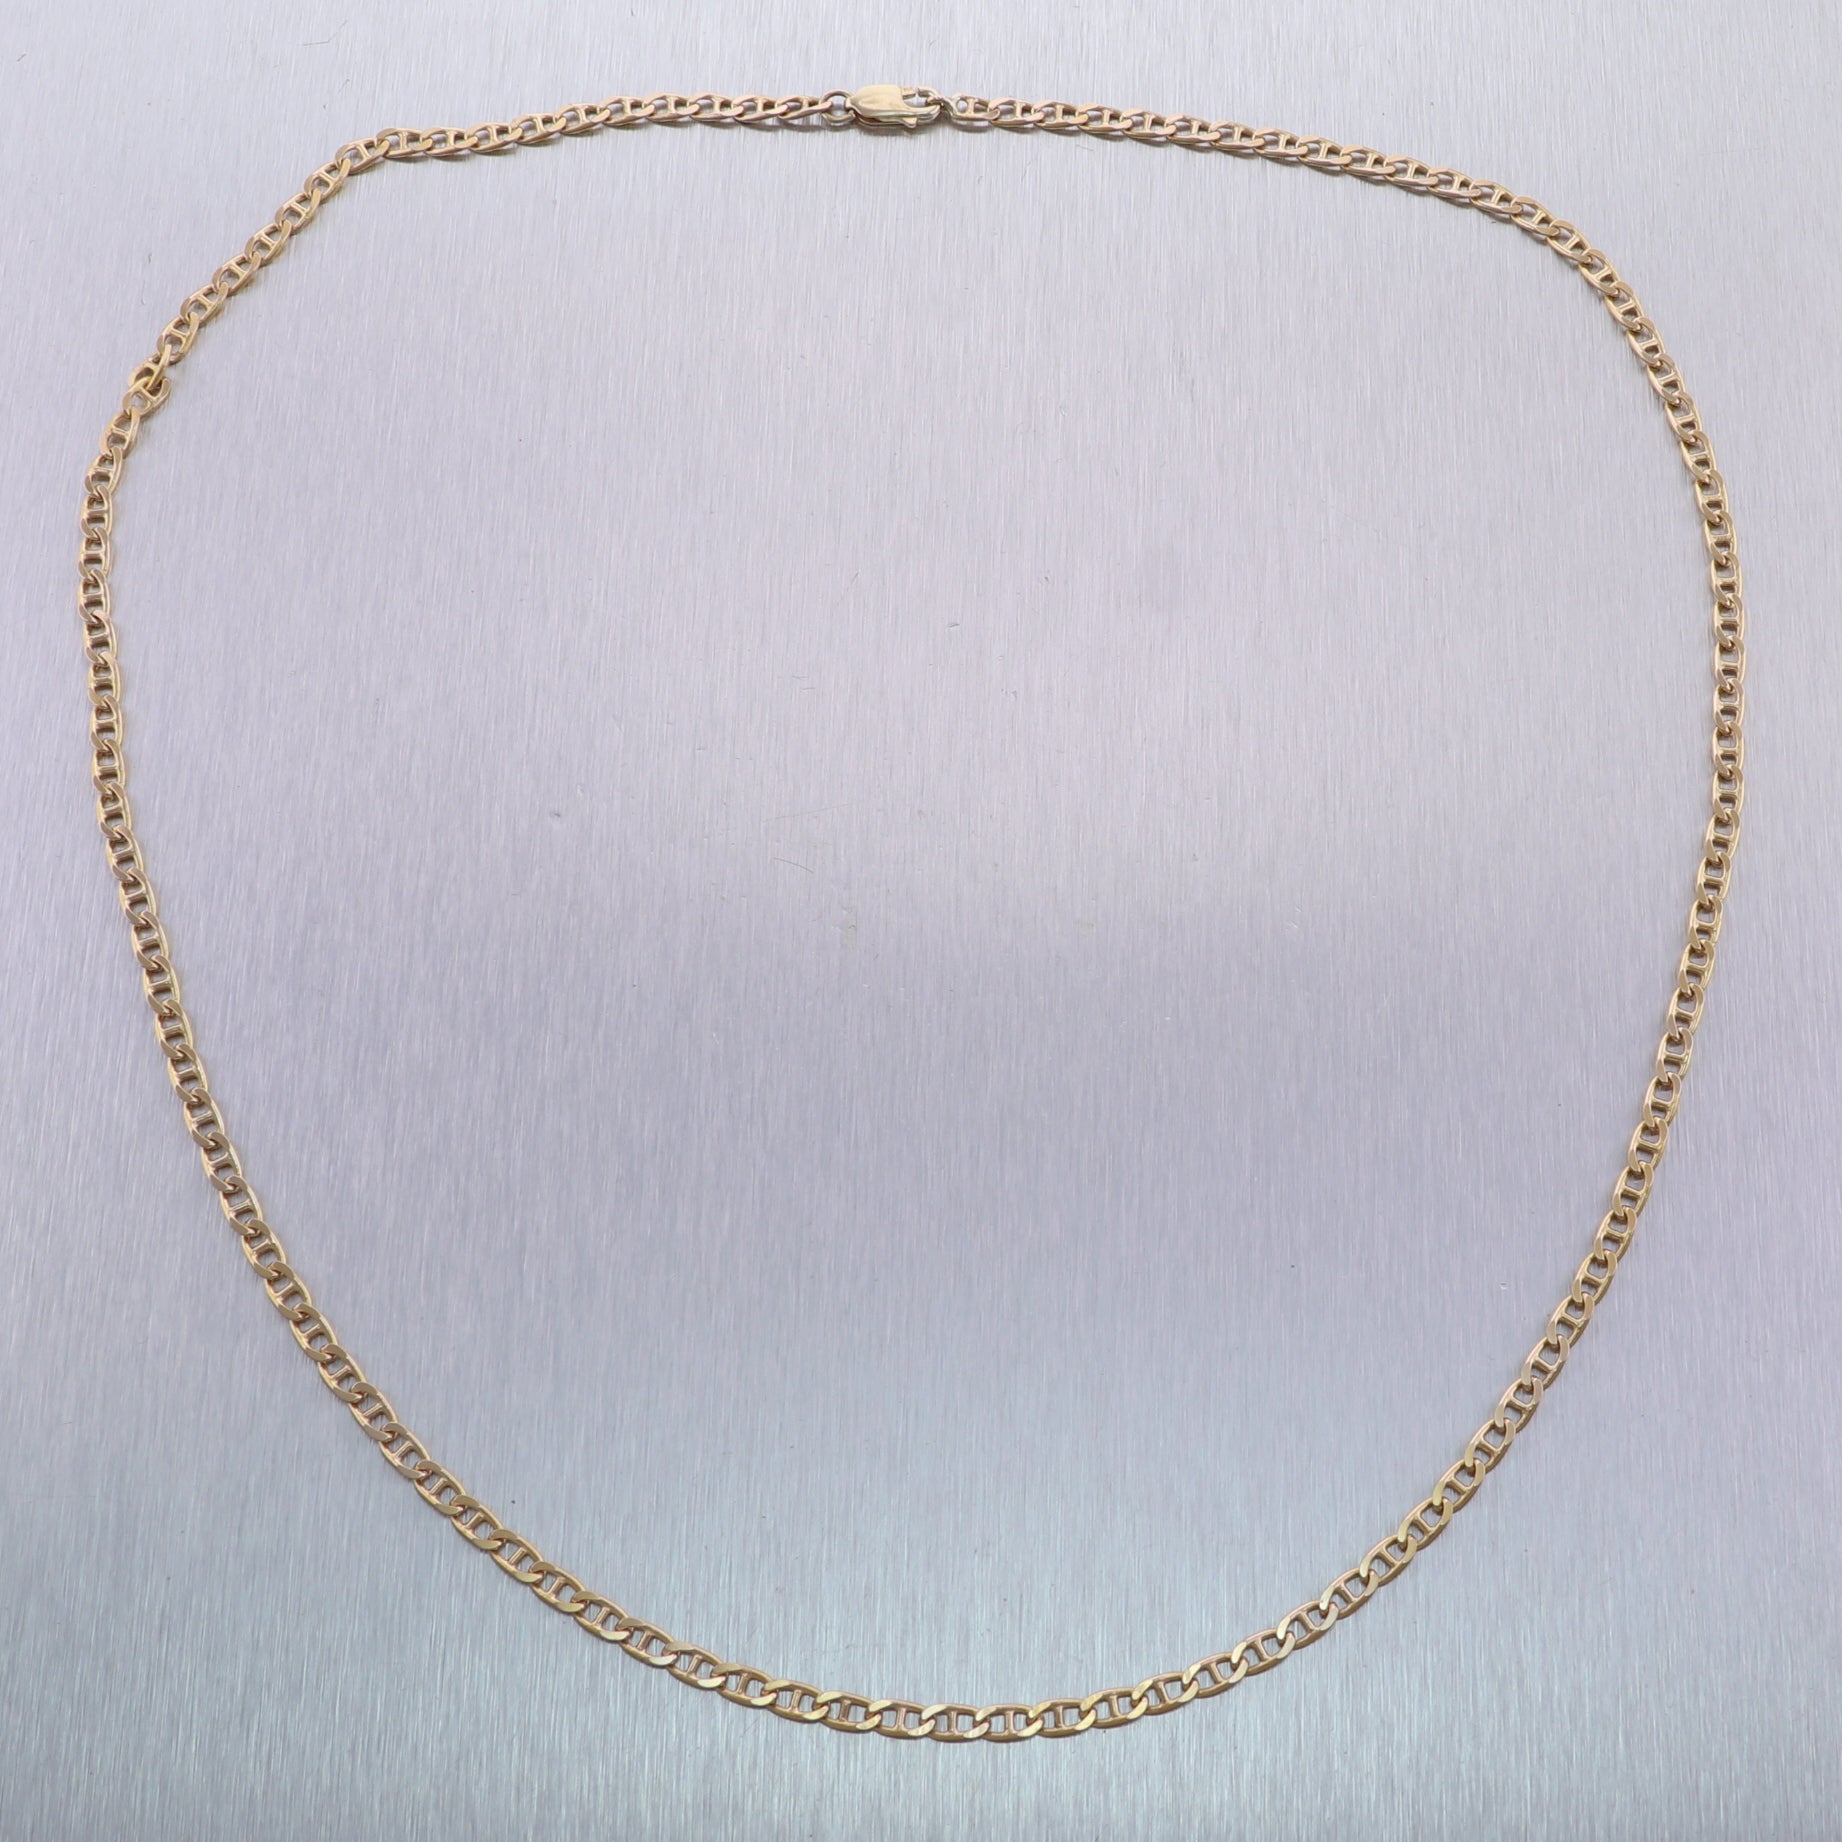 Men's 17.5g 14k Yellow Gold Anchor Mariner Chain 24" Necklace